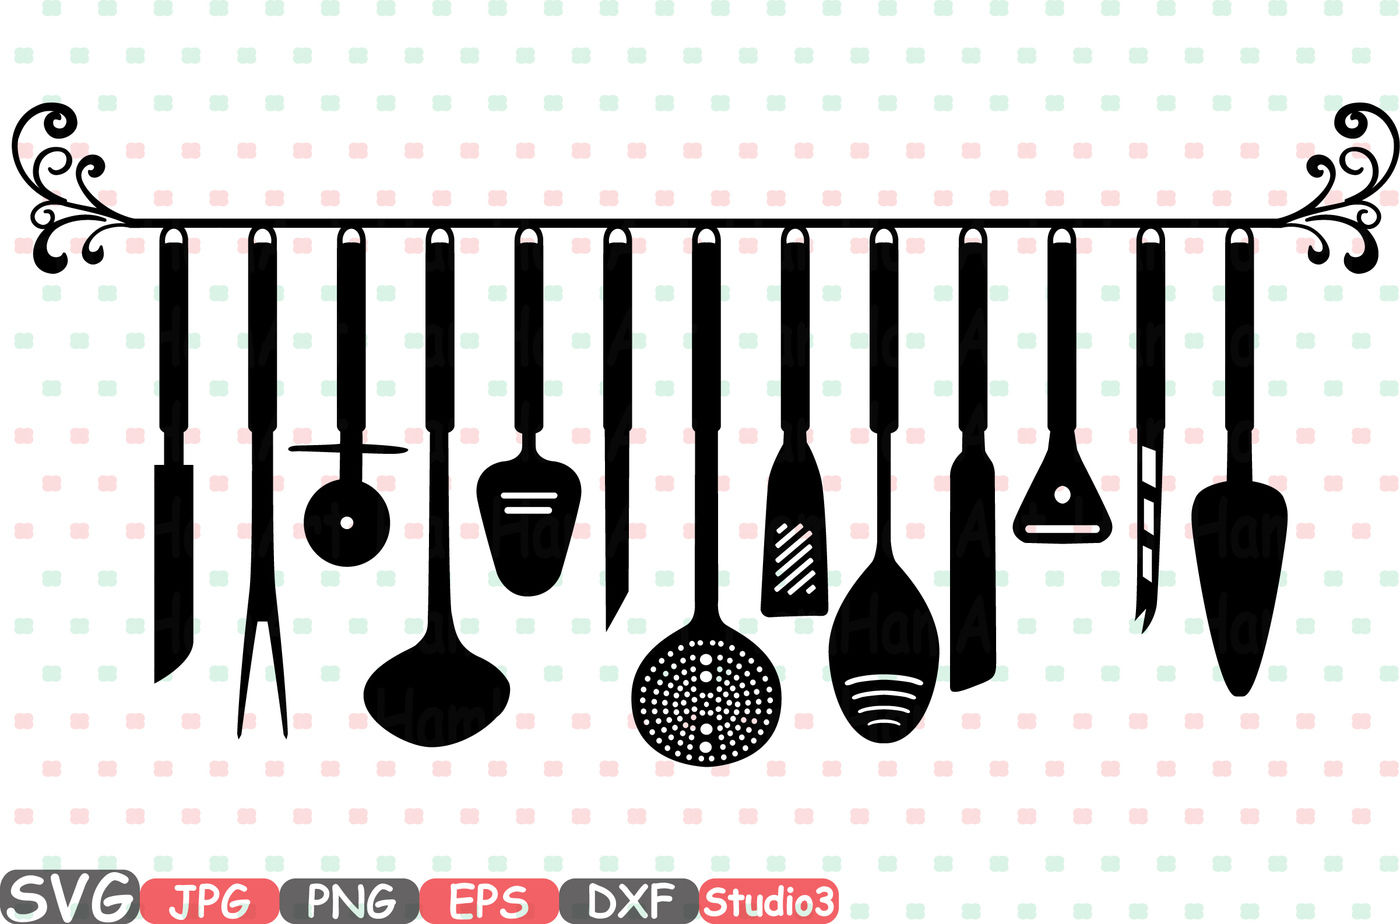 Ori 82530 B893c2be6d74059c8b962f0b598acb094ece67b7 Split Kitchen Svg Silhouette Cutting Files Cricut Studio3 Cameo Clipart Kitchen Utensils Cooking Food Stickers Clipart Tools Clip Art 572s 